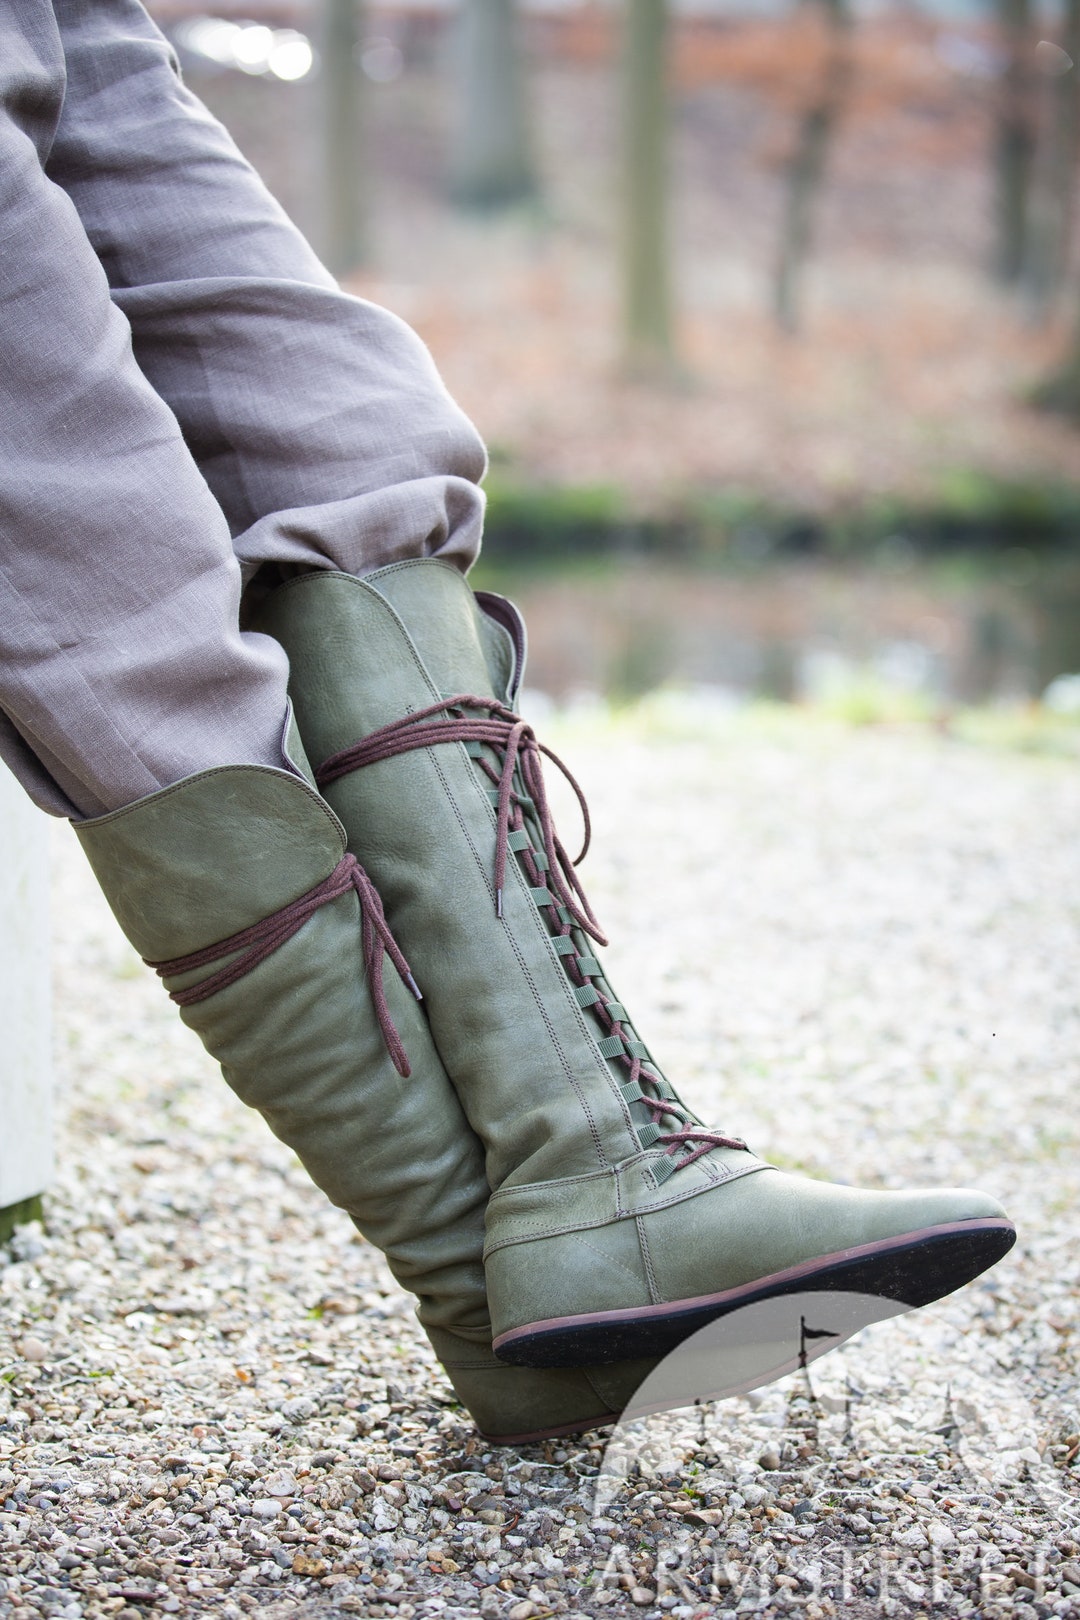 Medieval Men's High Leather Boots forest 